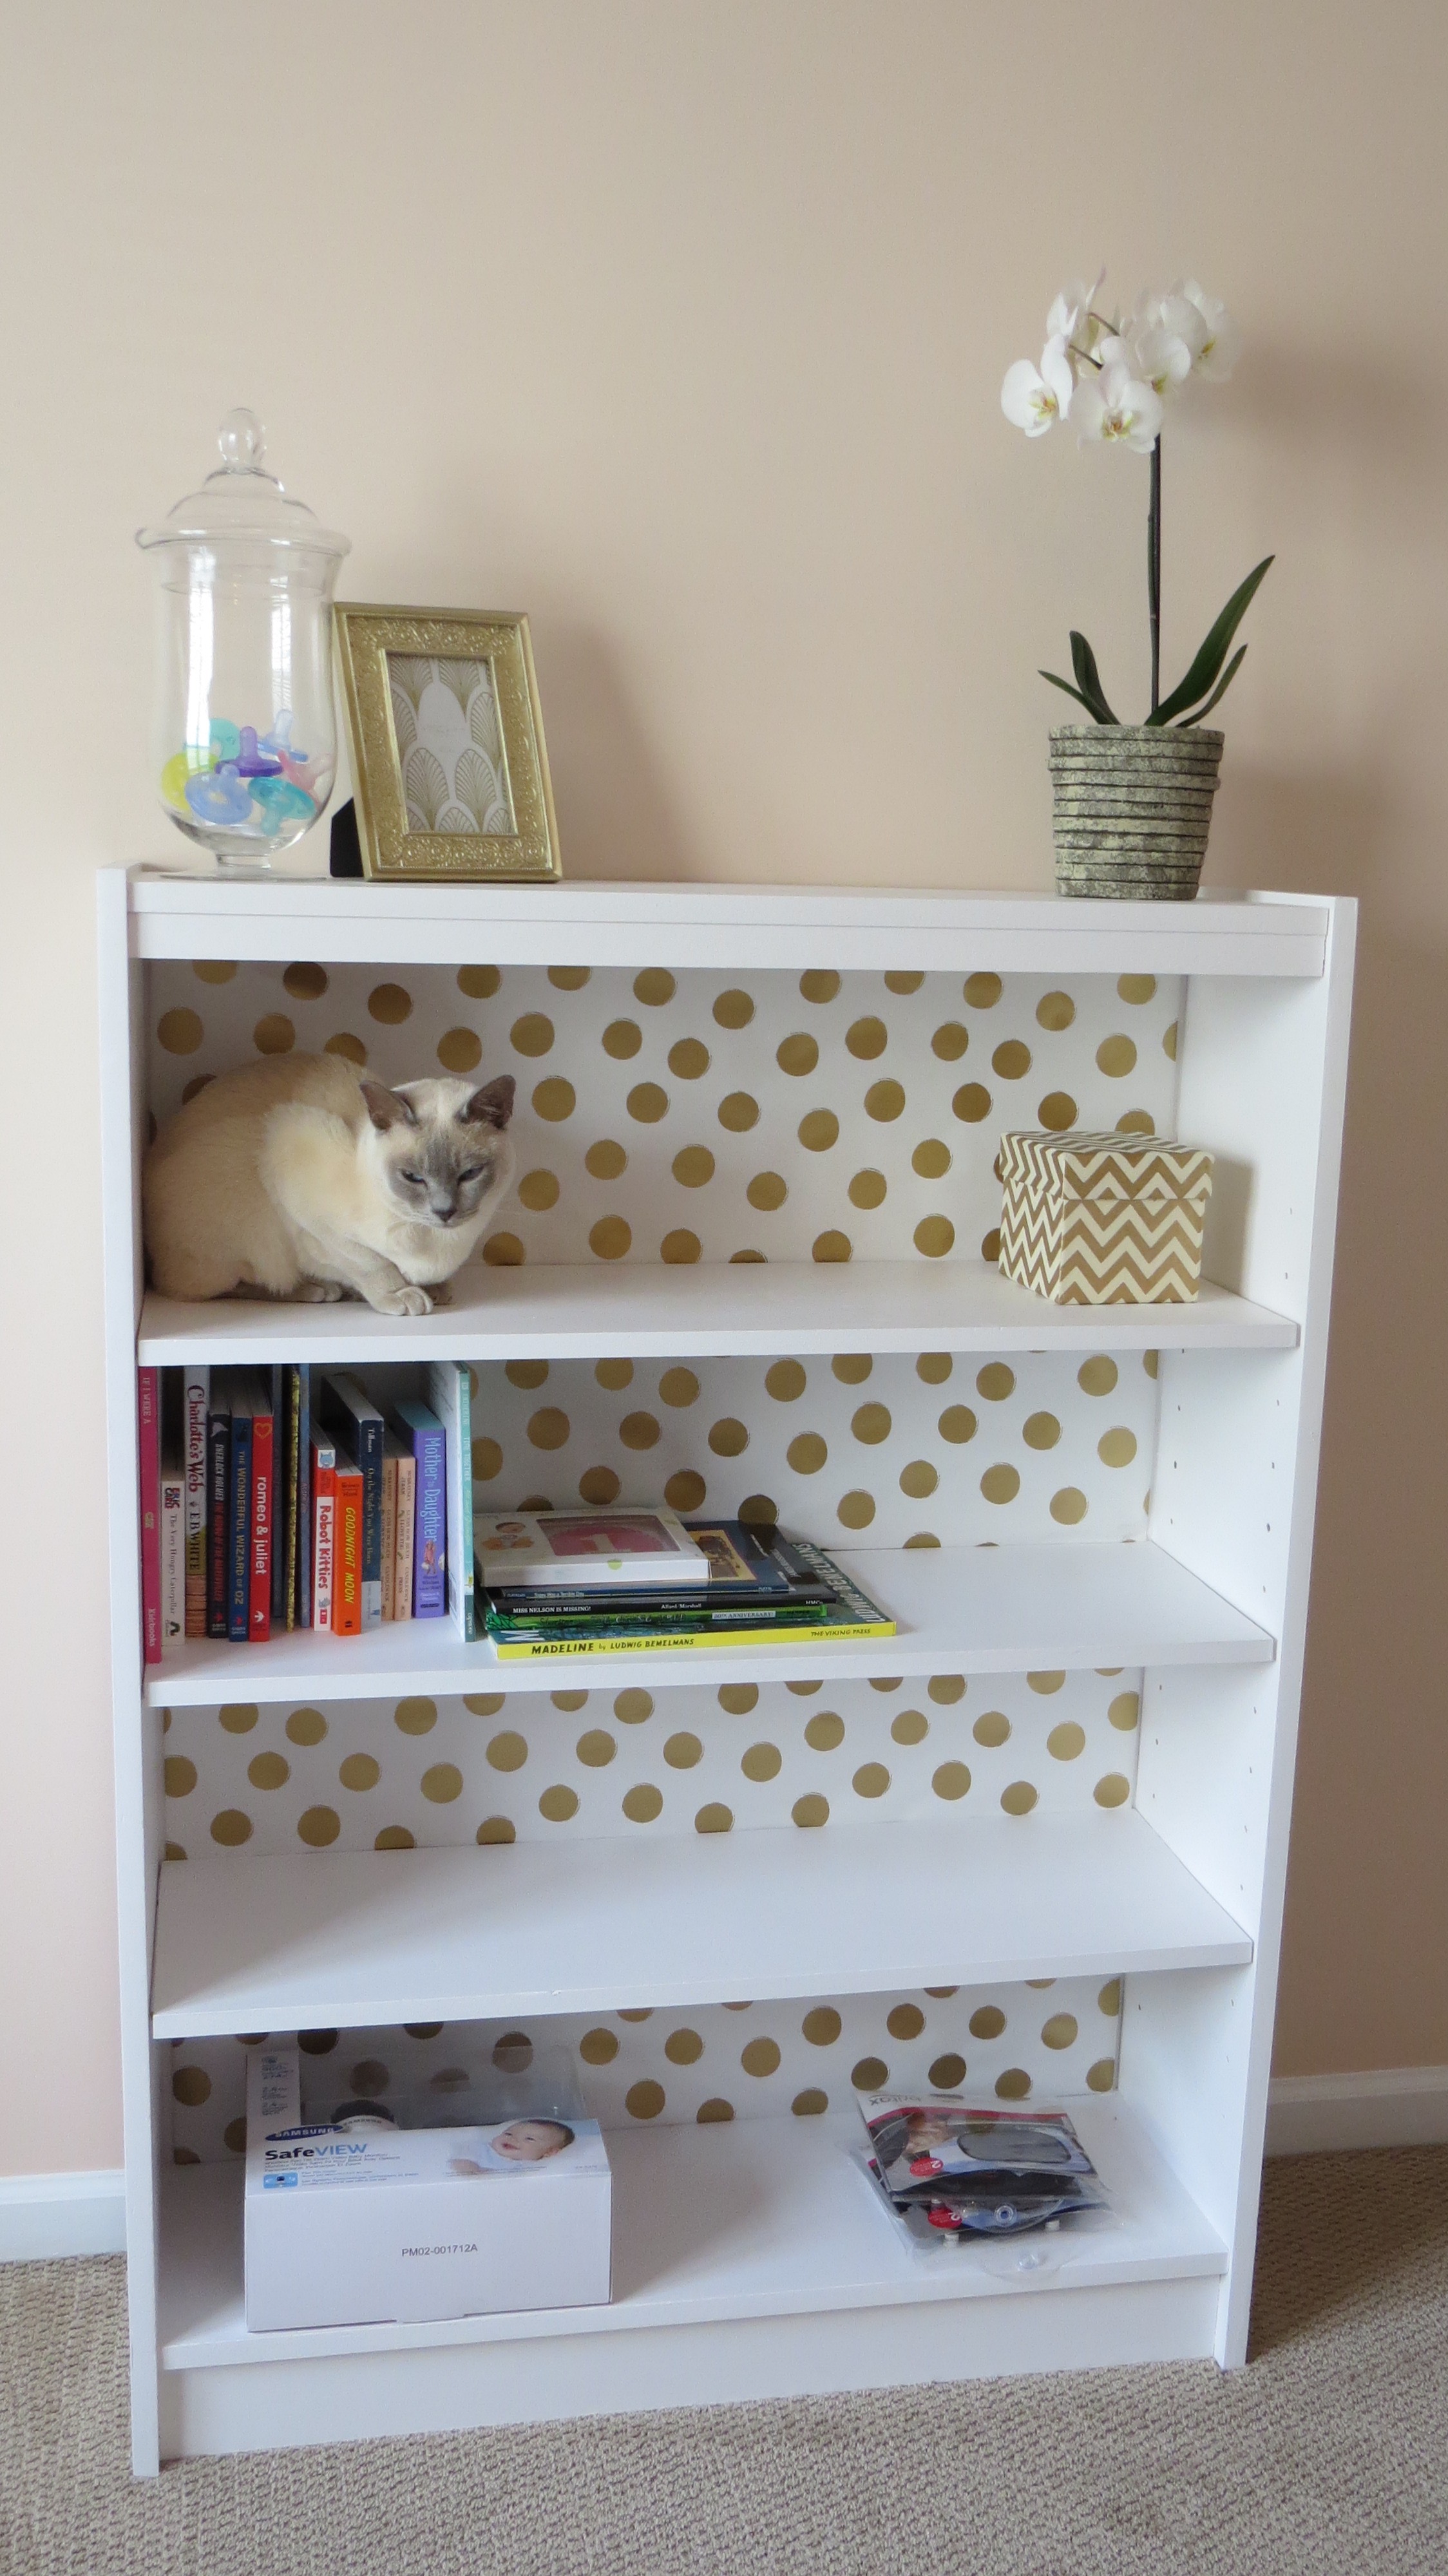 Gold foil polka dot wrapping paper to line the back of the bookcase